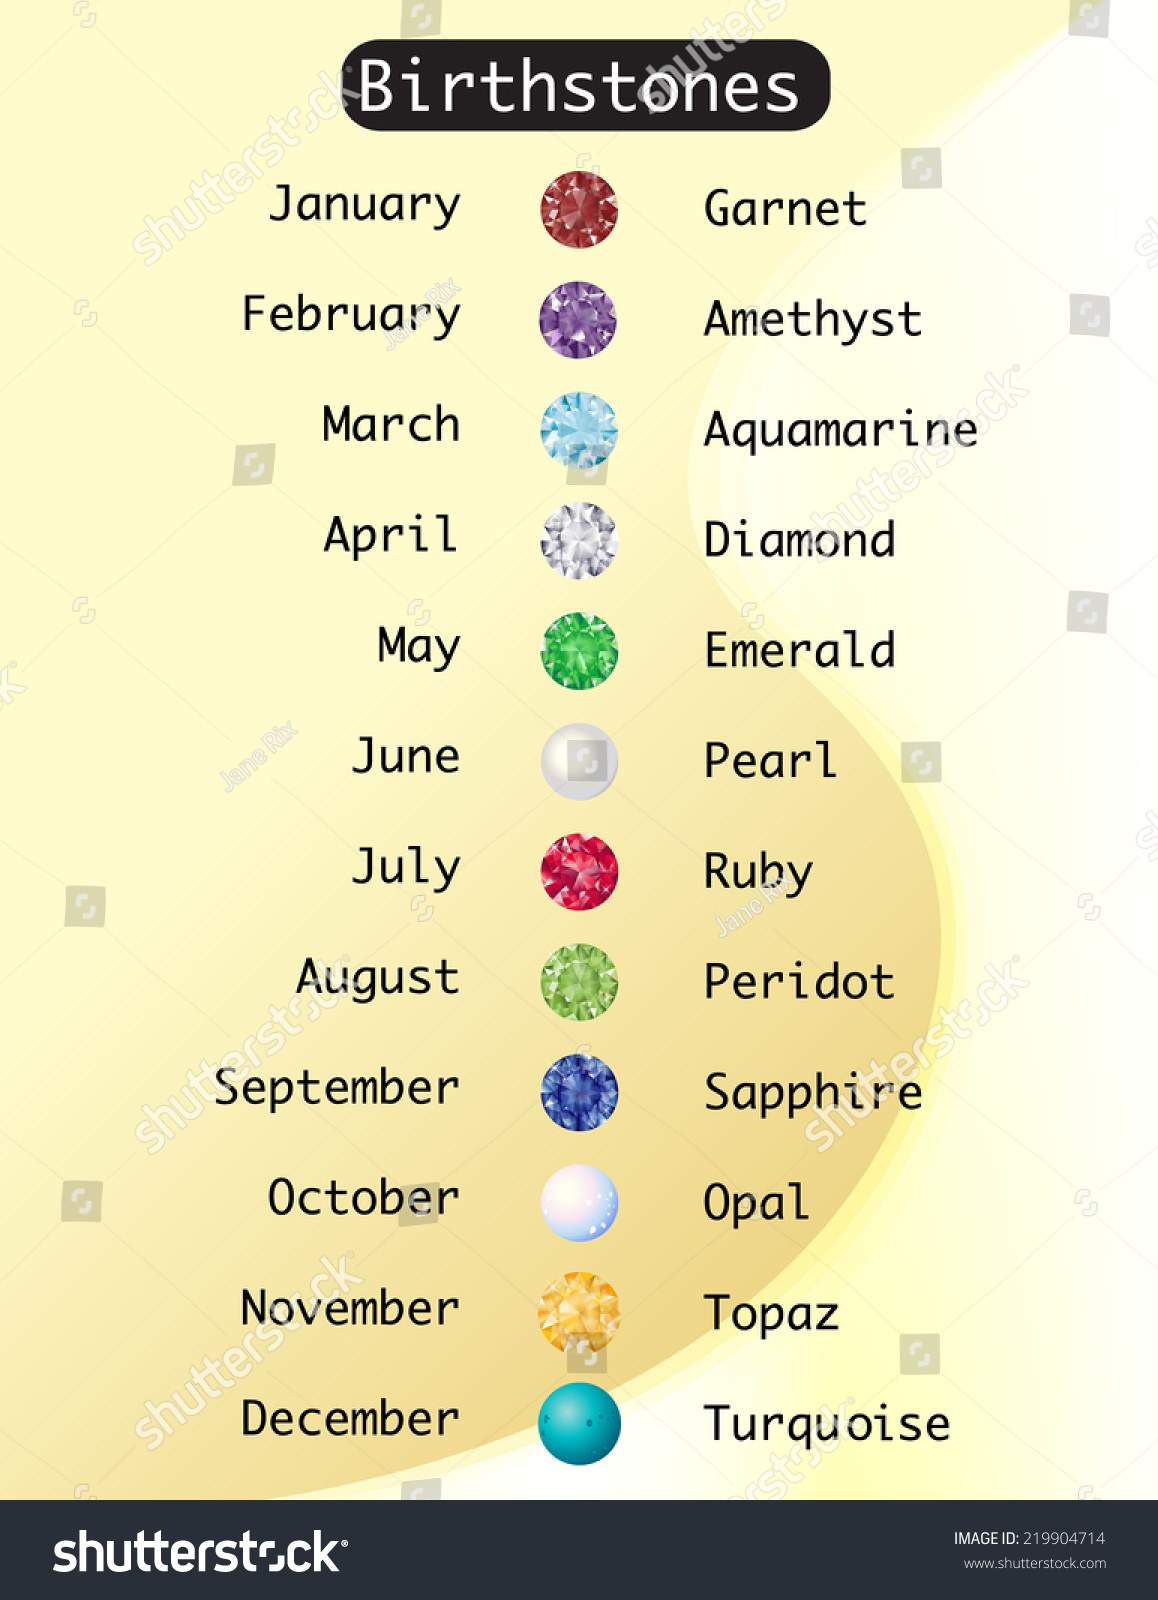 What is the birthstone for the month of August?